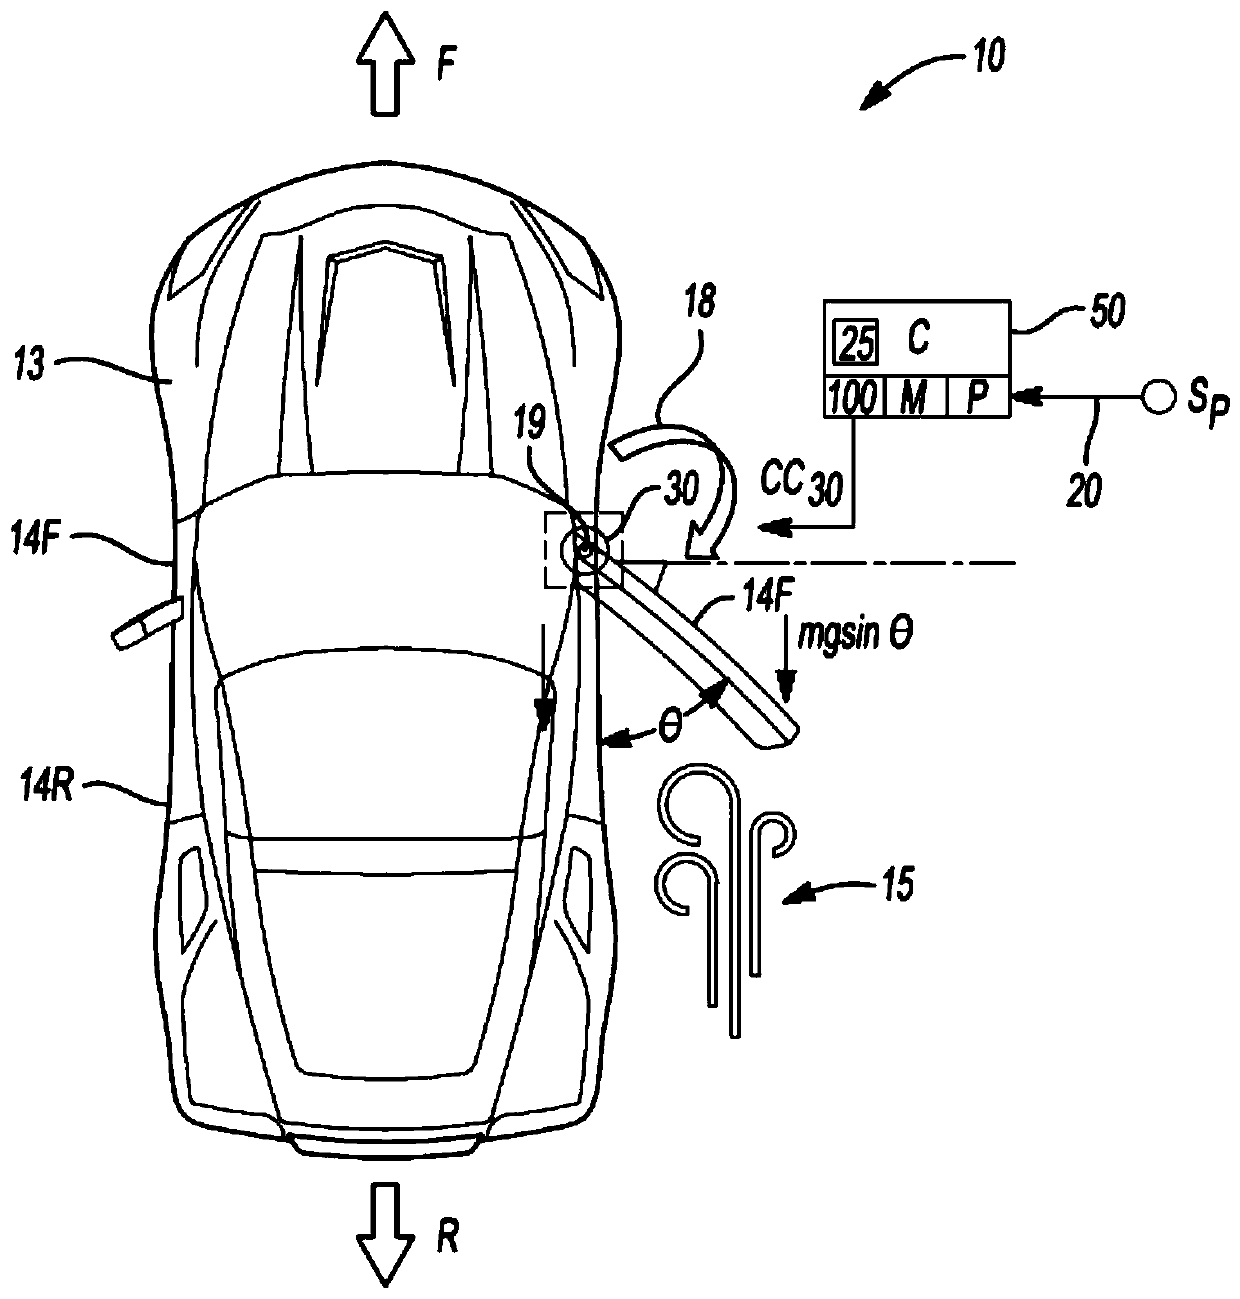 Vehicle with electric swing door and position-based torque compensation method